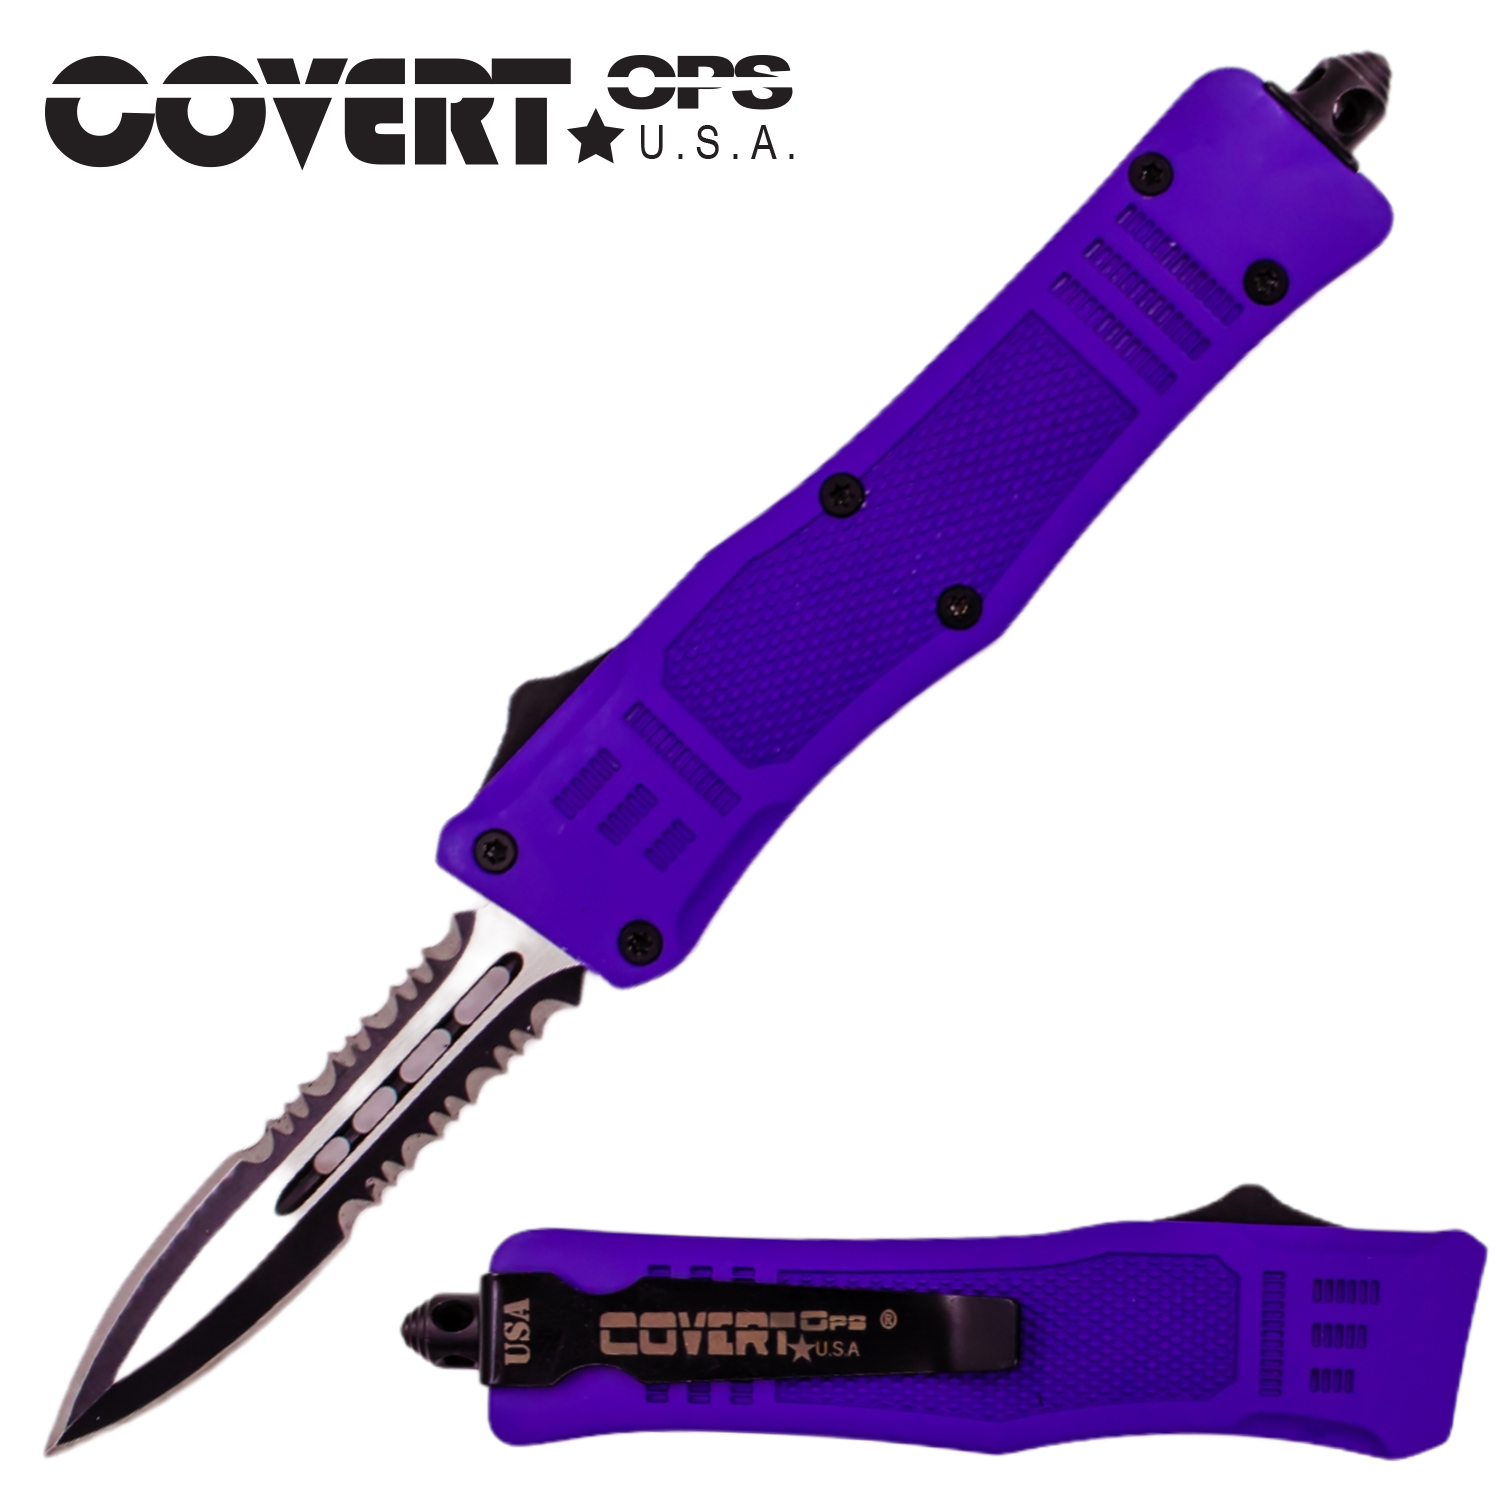 Covert OPS USA OTF Automatic Knife 7 inch Purple Handle Double Serr 2T